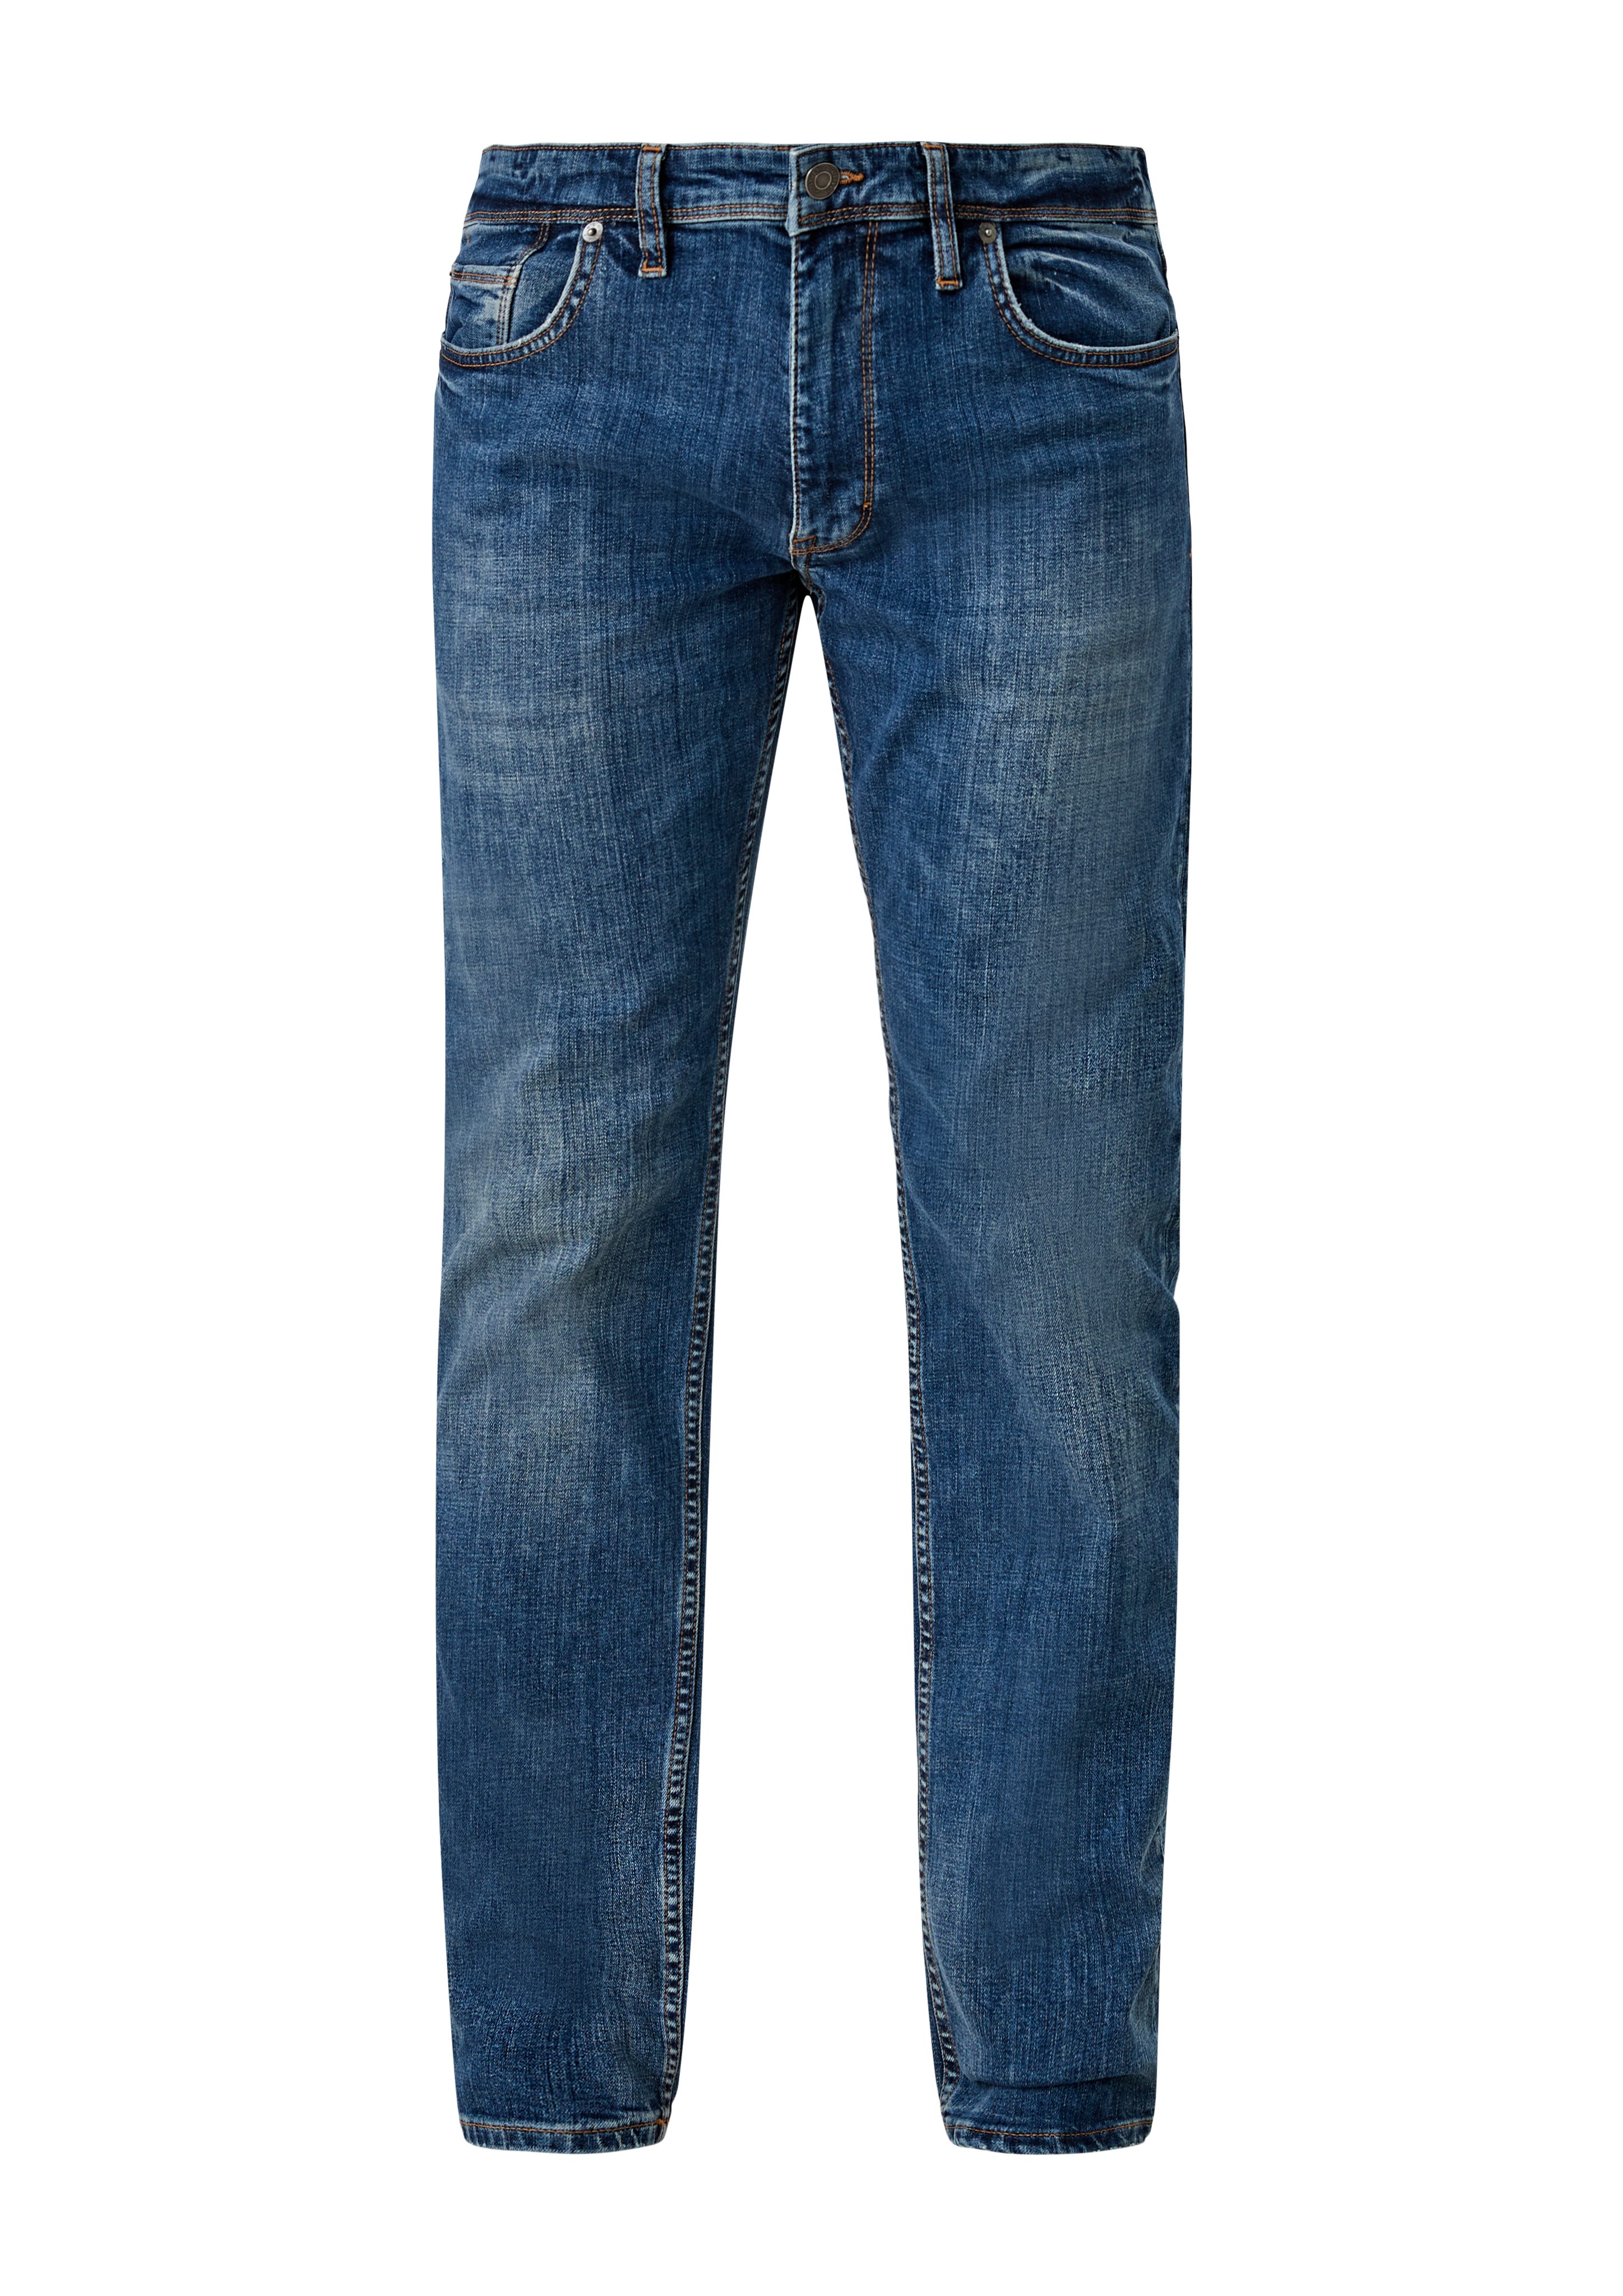 Regular Waschung Fit blue Rise York Leg Jeans / s.Oliver Straight dark / Mid Stoffhose /